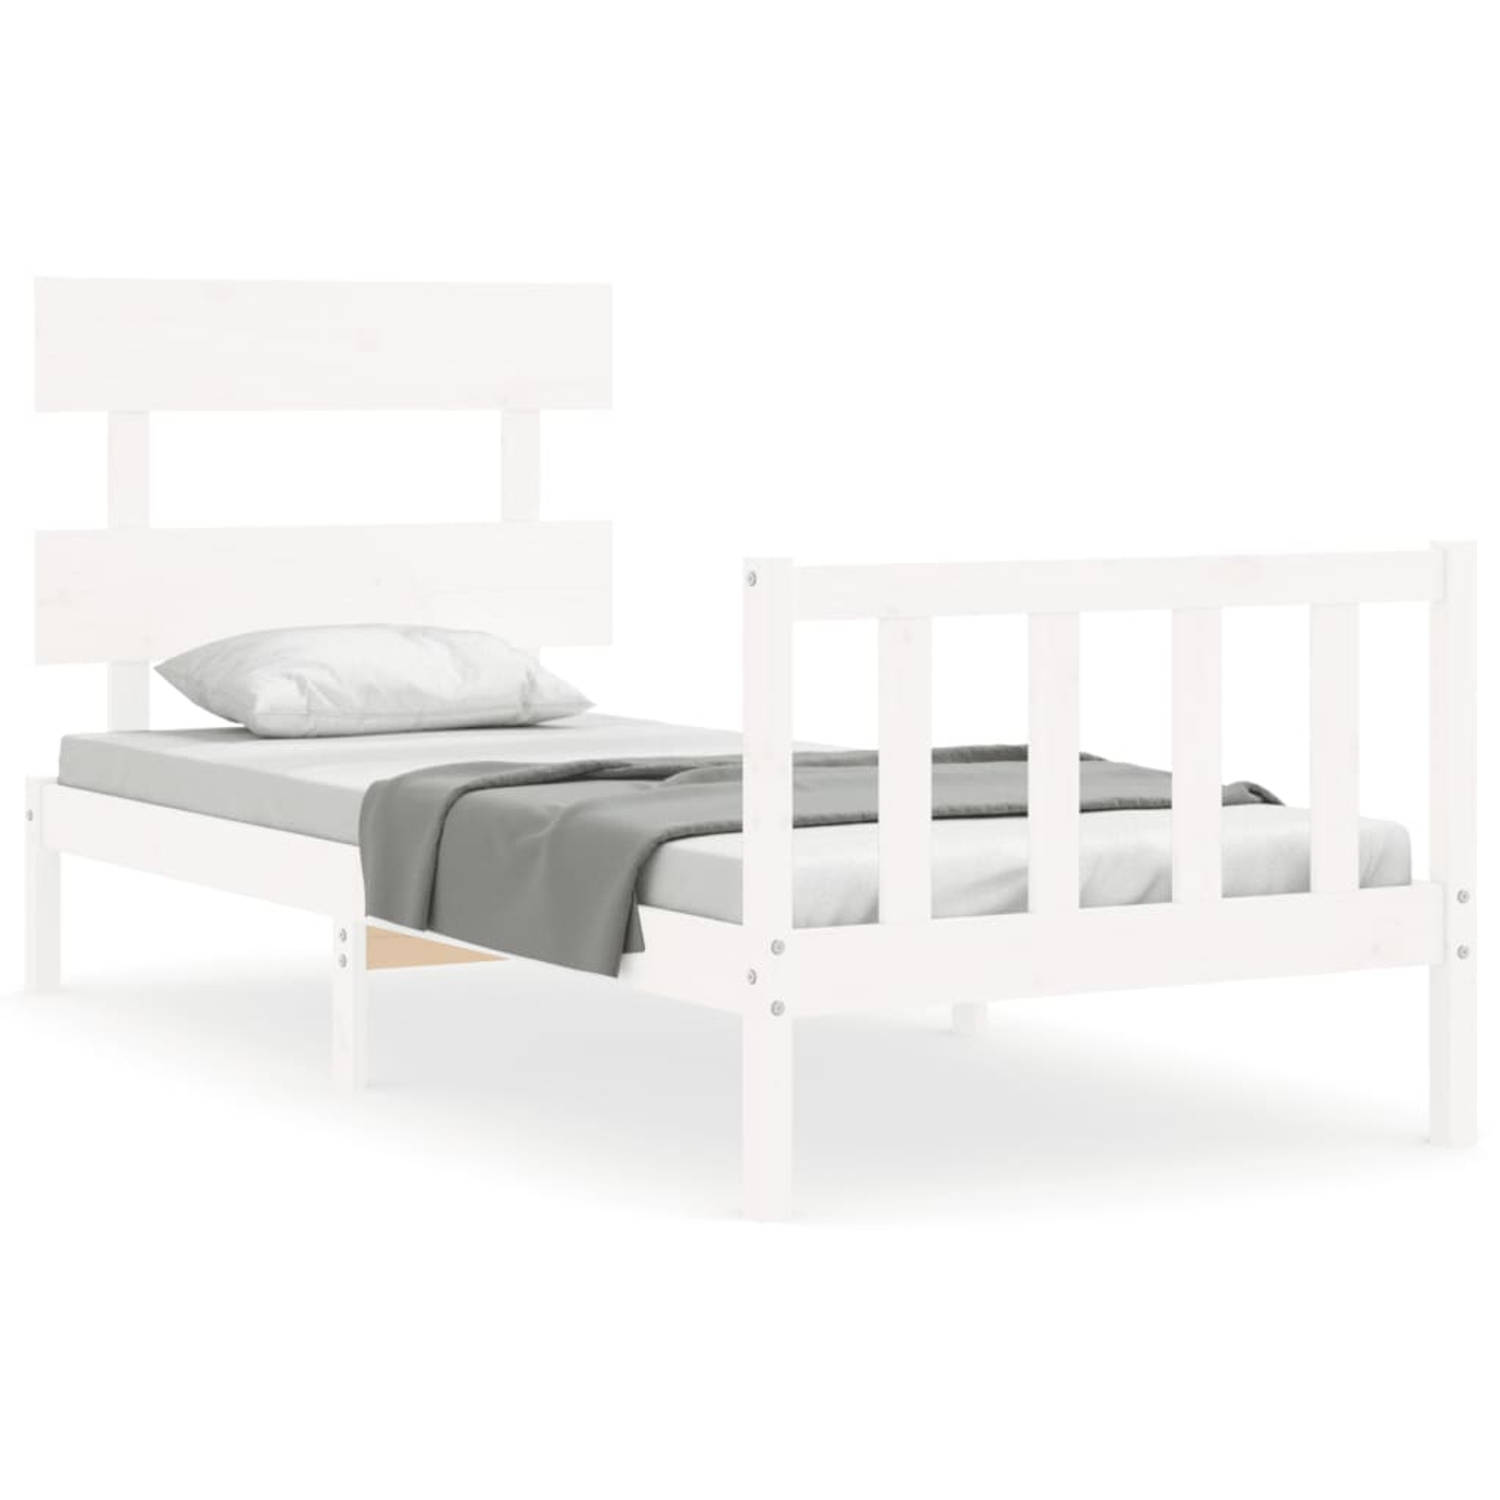 The Living Store Bedframe - Massief grenenhout - 195.5 x 95.5 x 81 cm - Wit